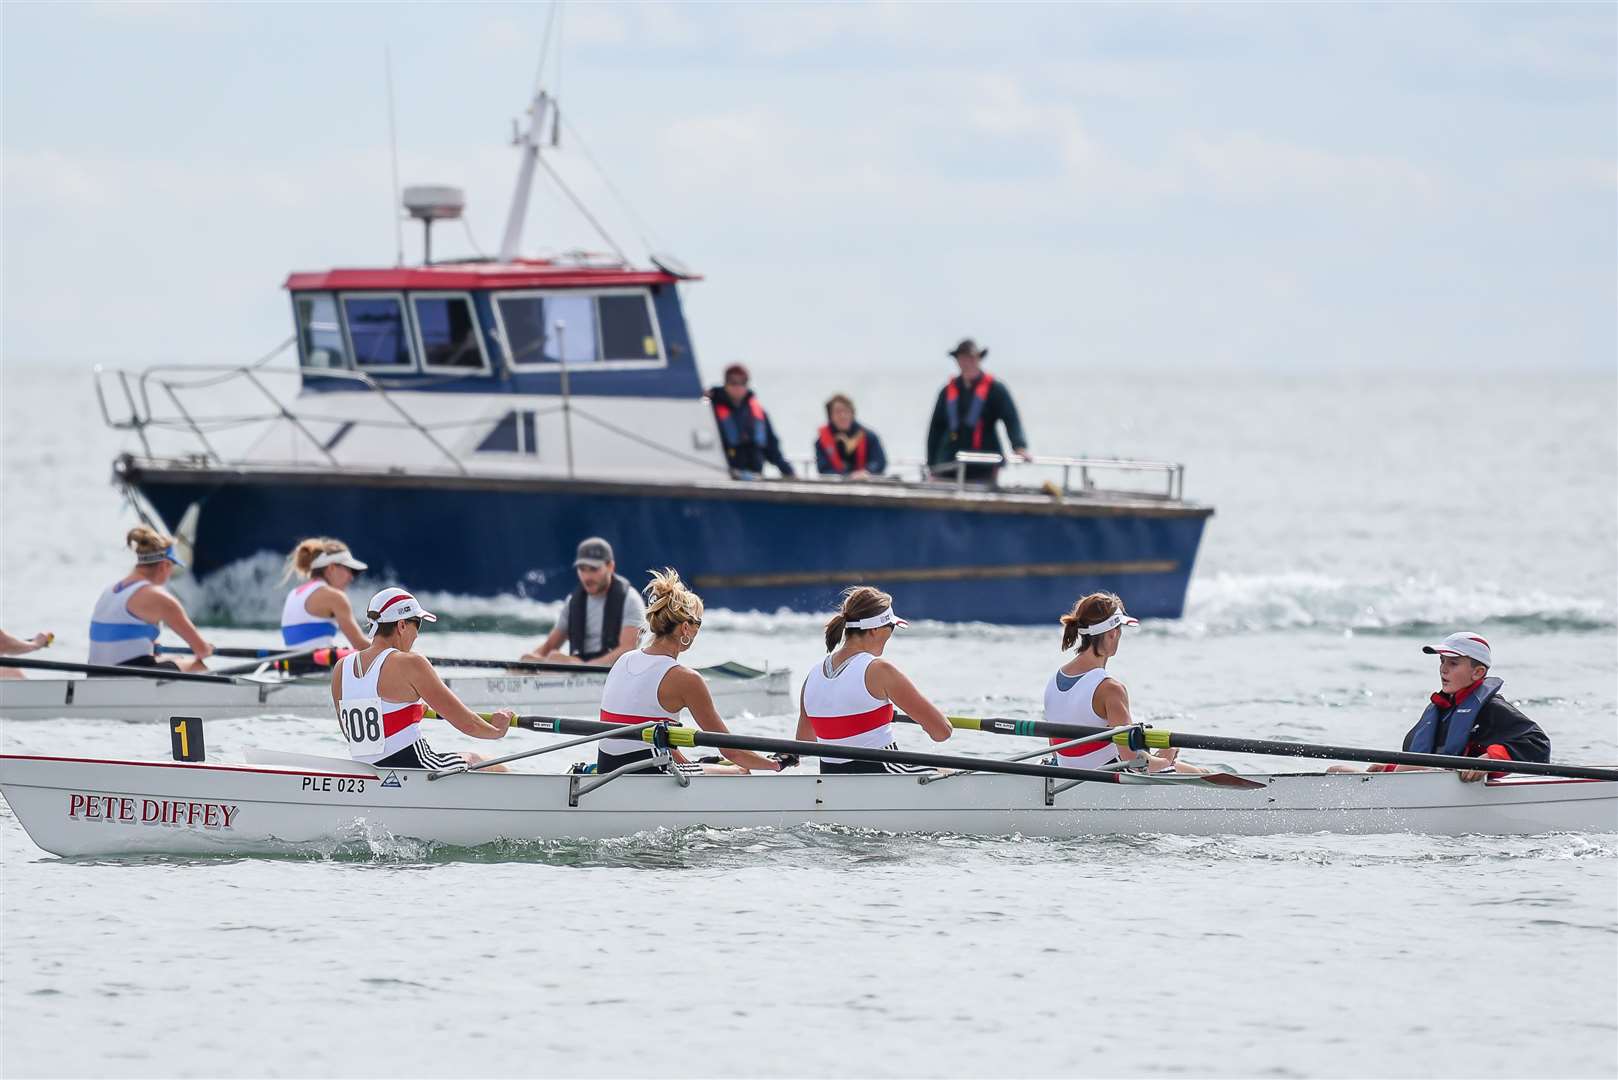 Deal Rowing Club hosts its annual rowing regatta today